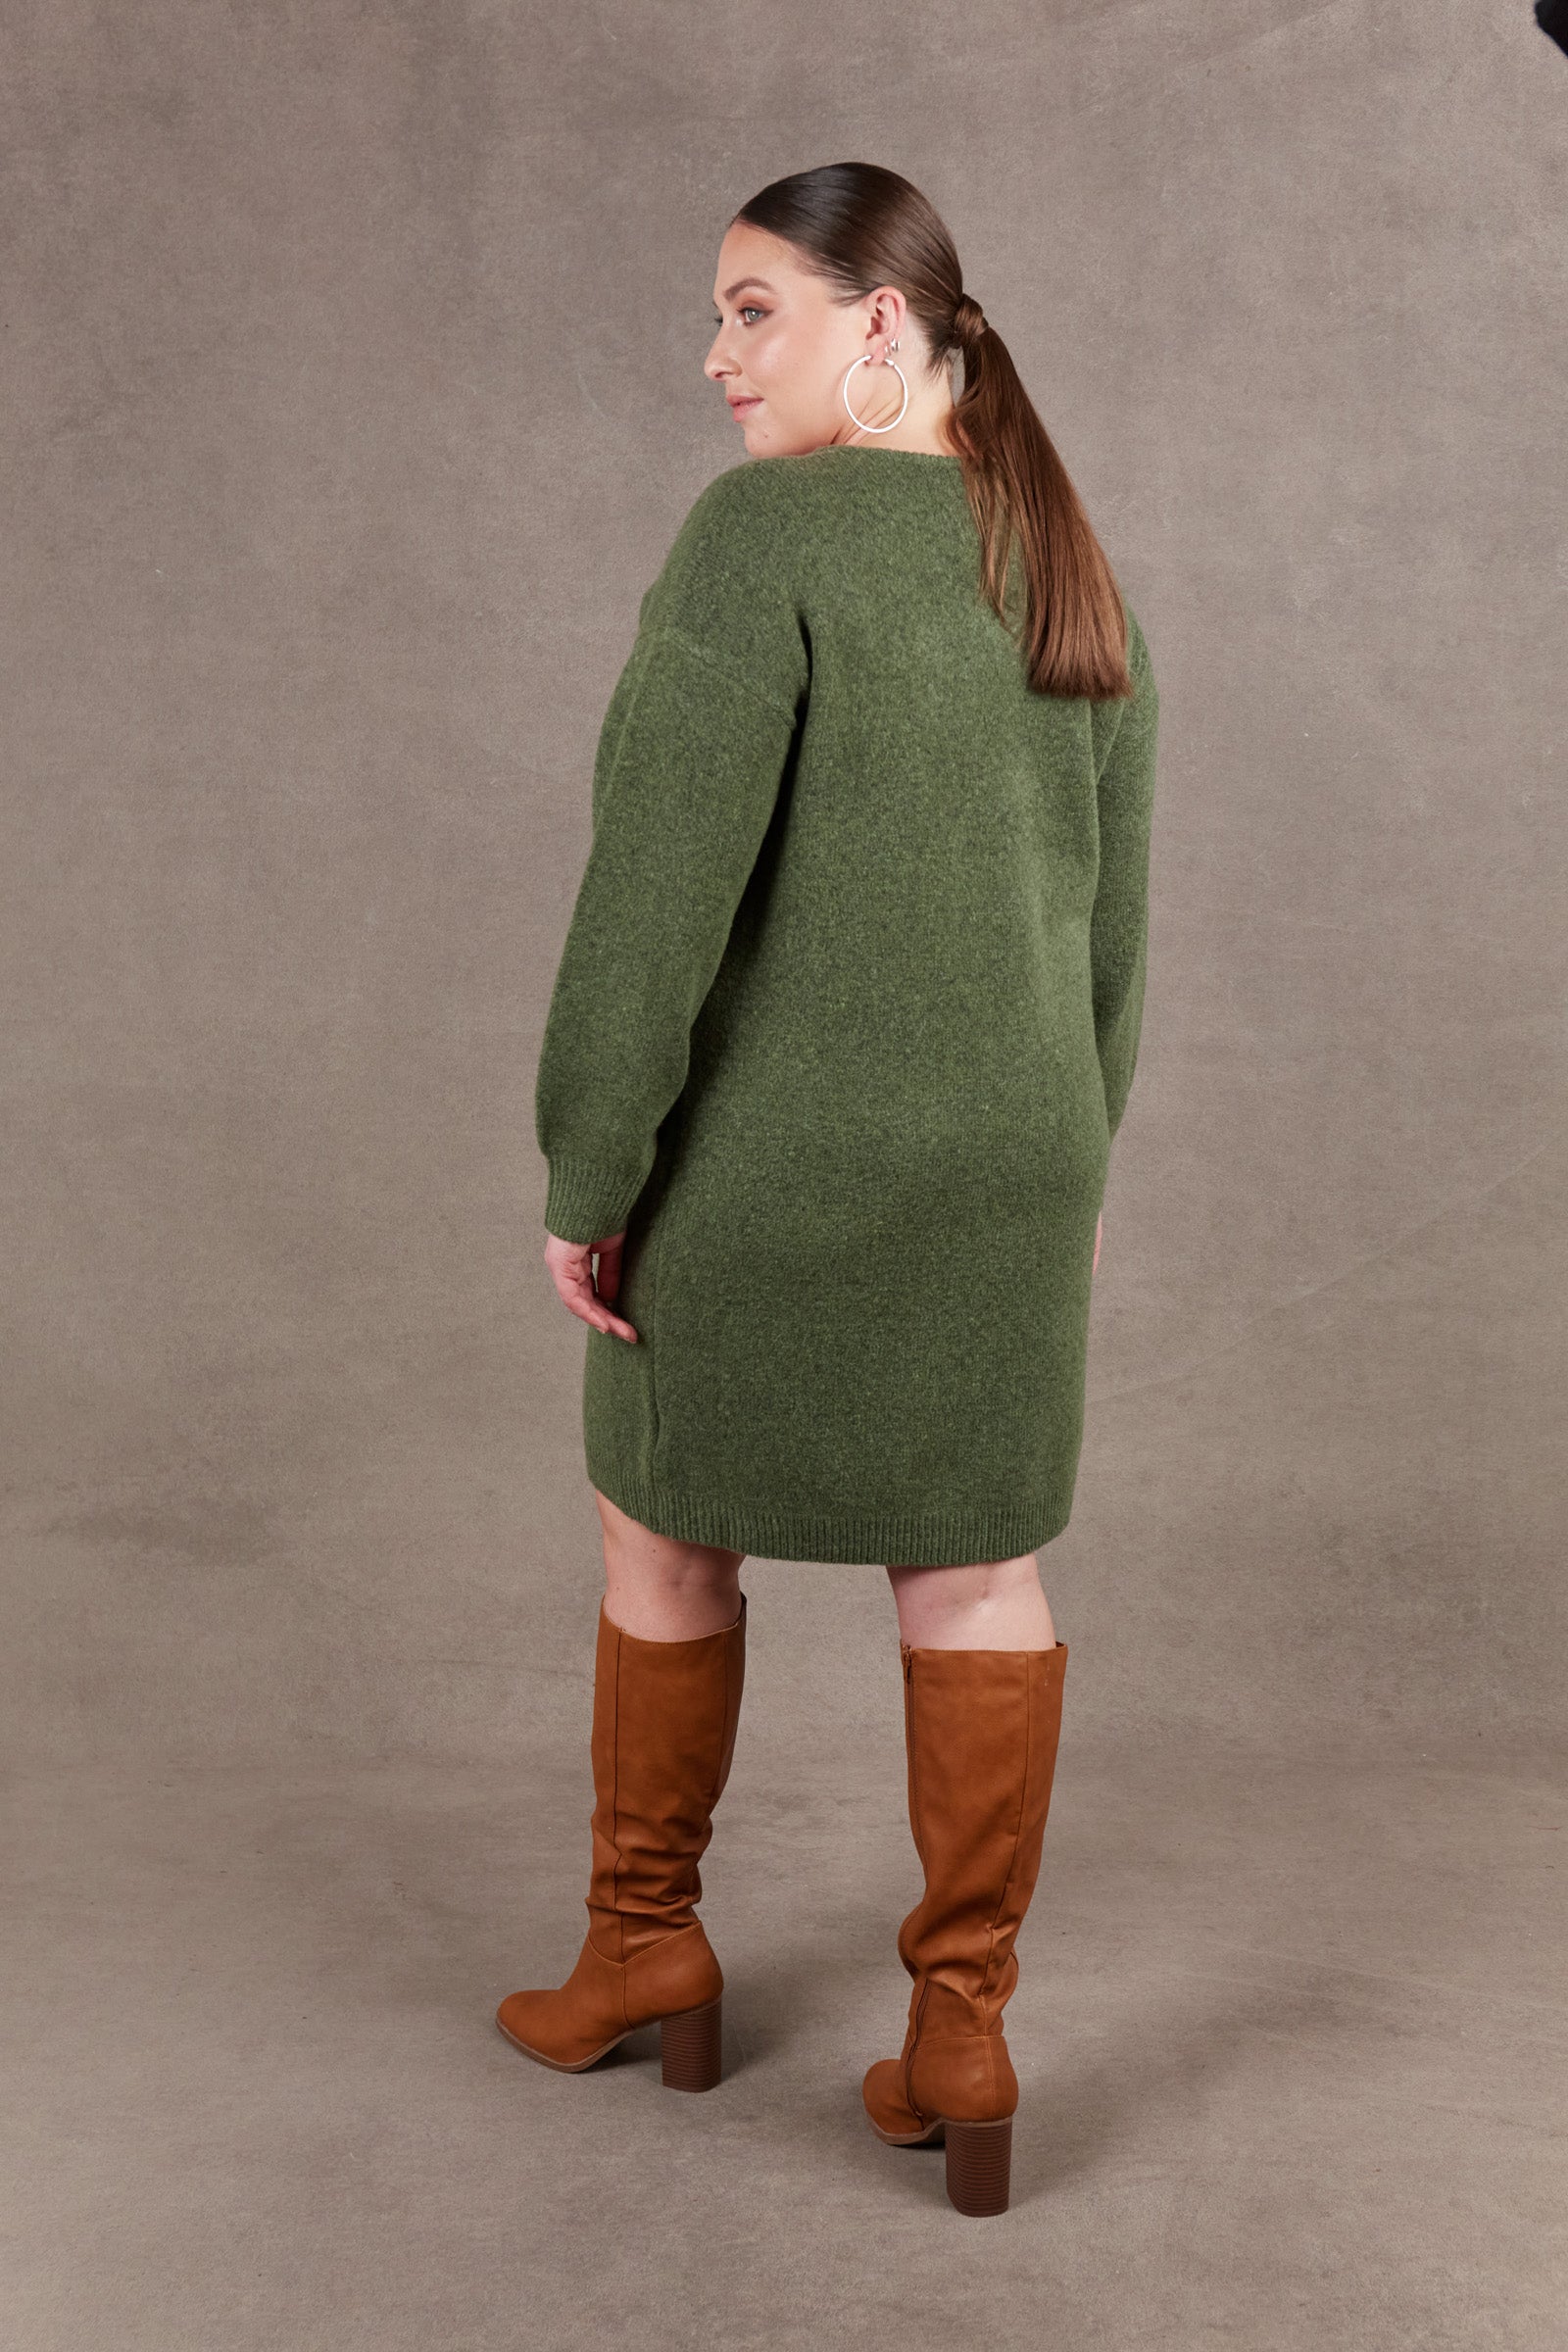 Paarl Midi Knit - Moss - eb&ive Clothing - Knit Jumper One Size